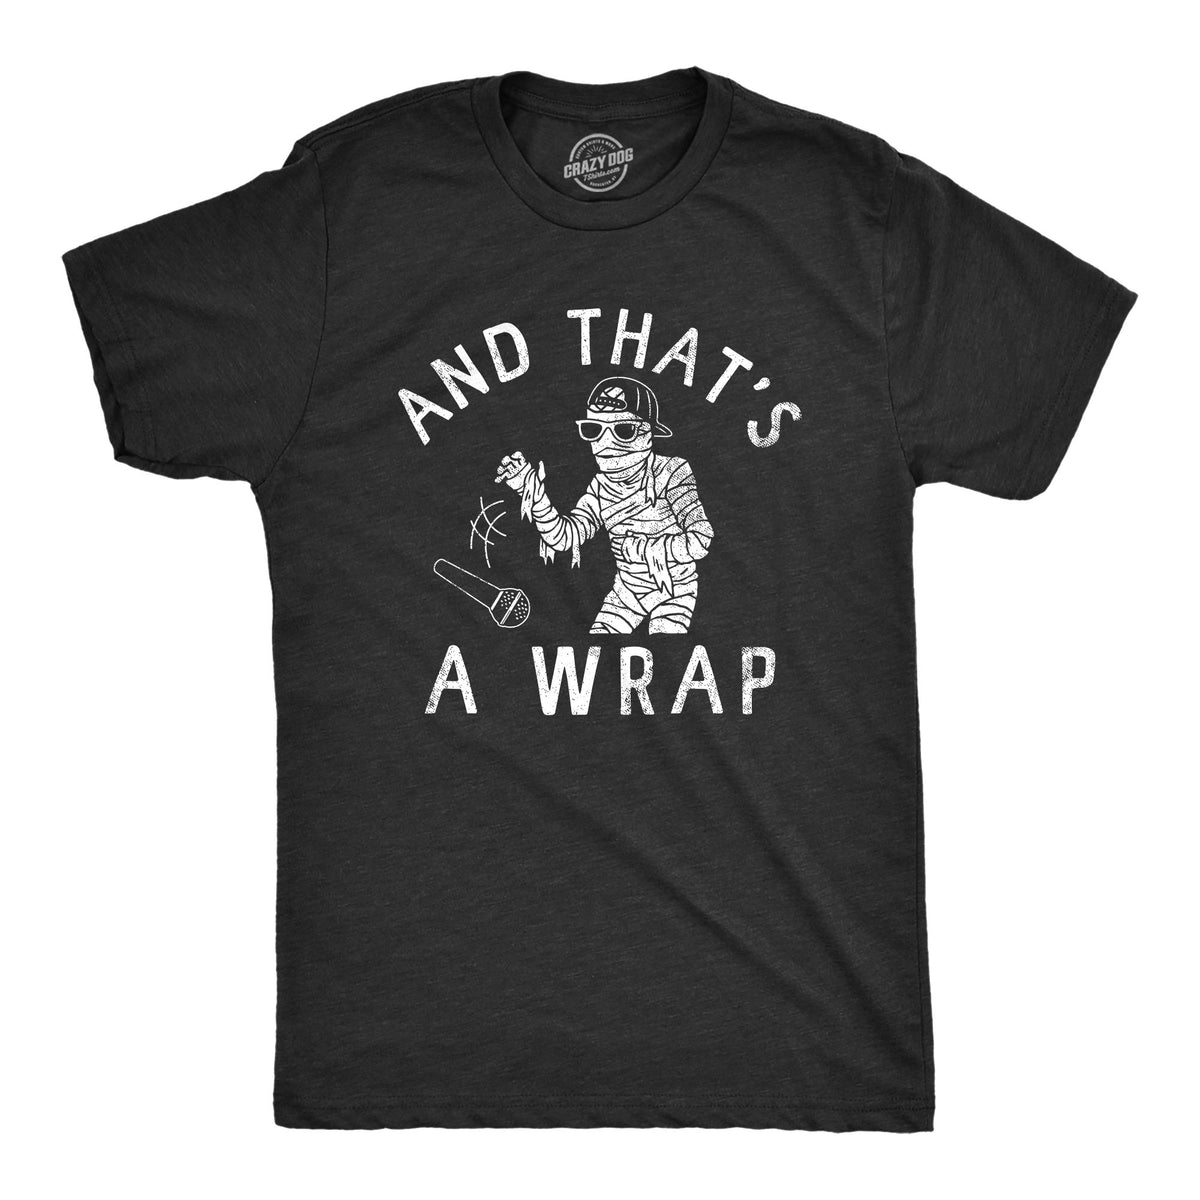 Funny Heather Black - WRAP And Thats A Wrap Mens T Shirt Nerdy Halloween Tee